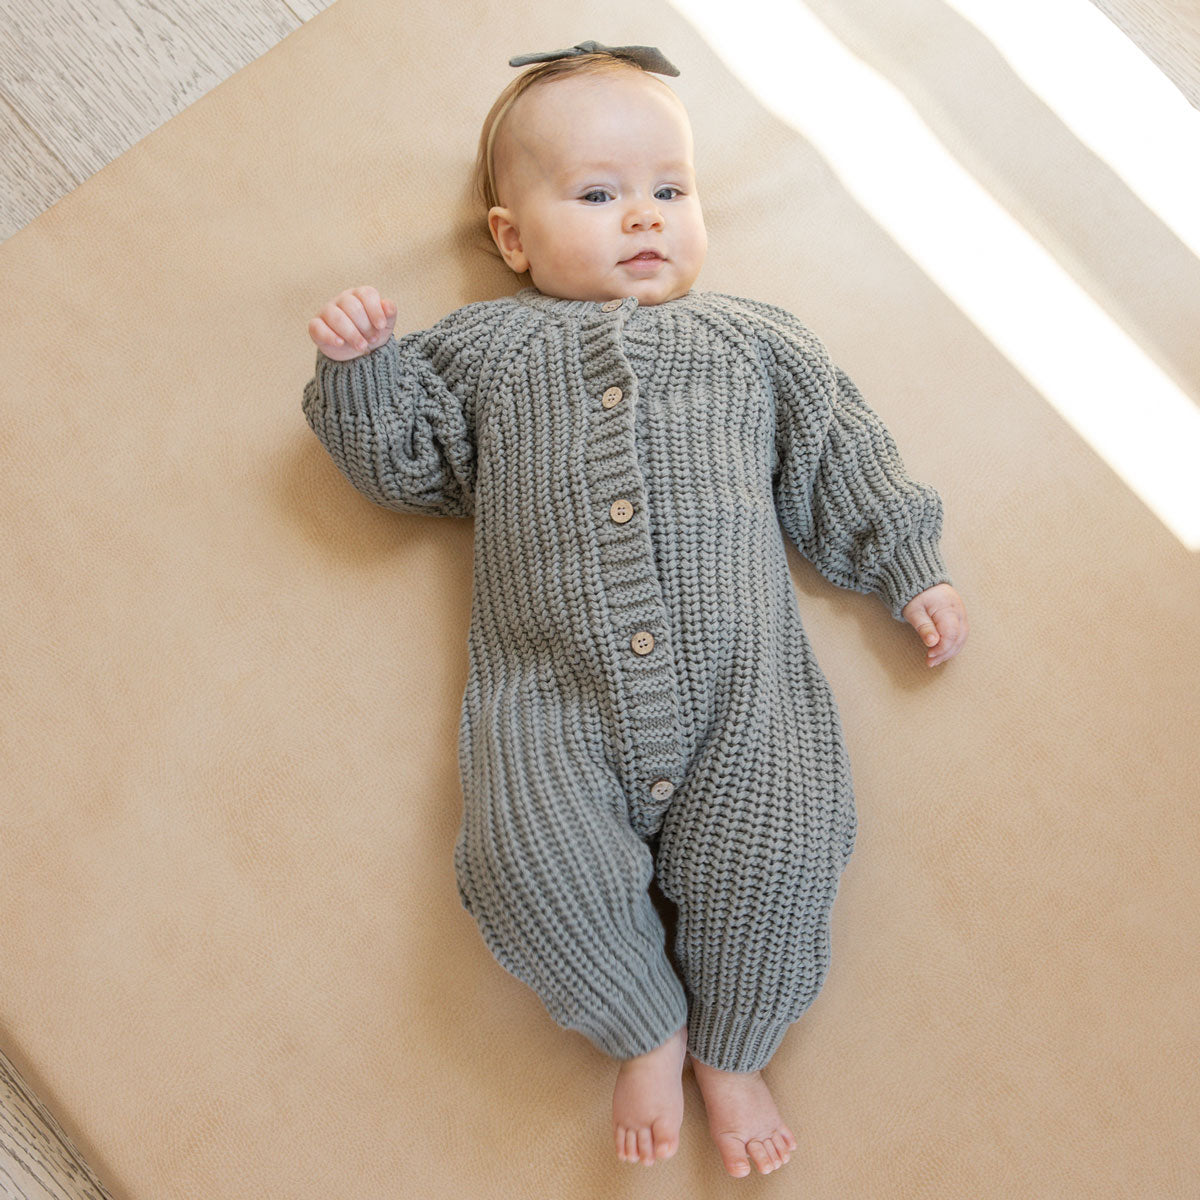 Baby wearing Quincy Mae Chunky Knit Jumpsuit - Basil